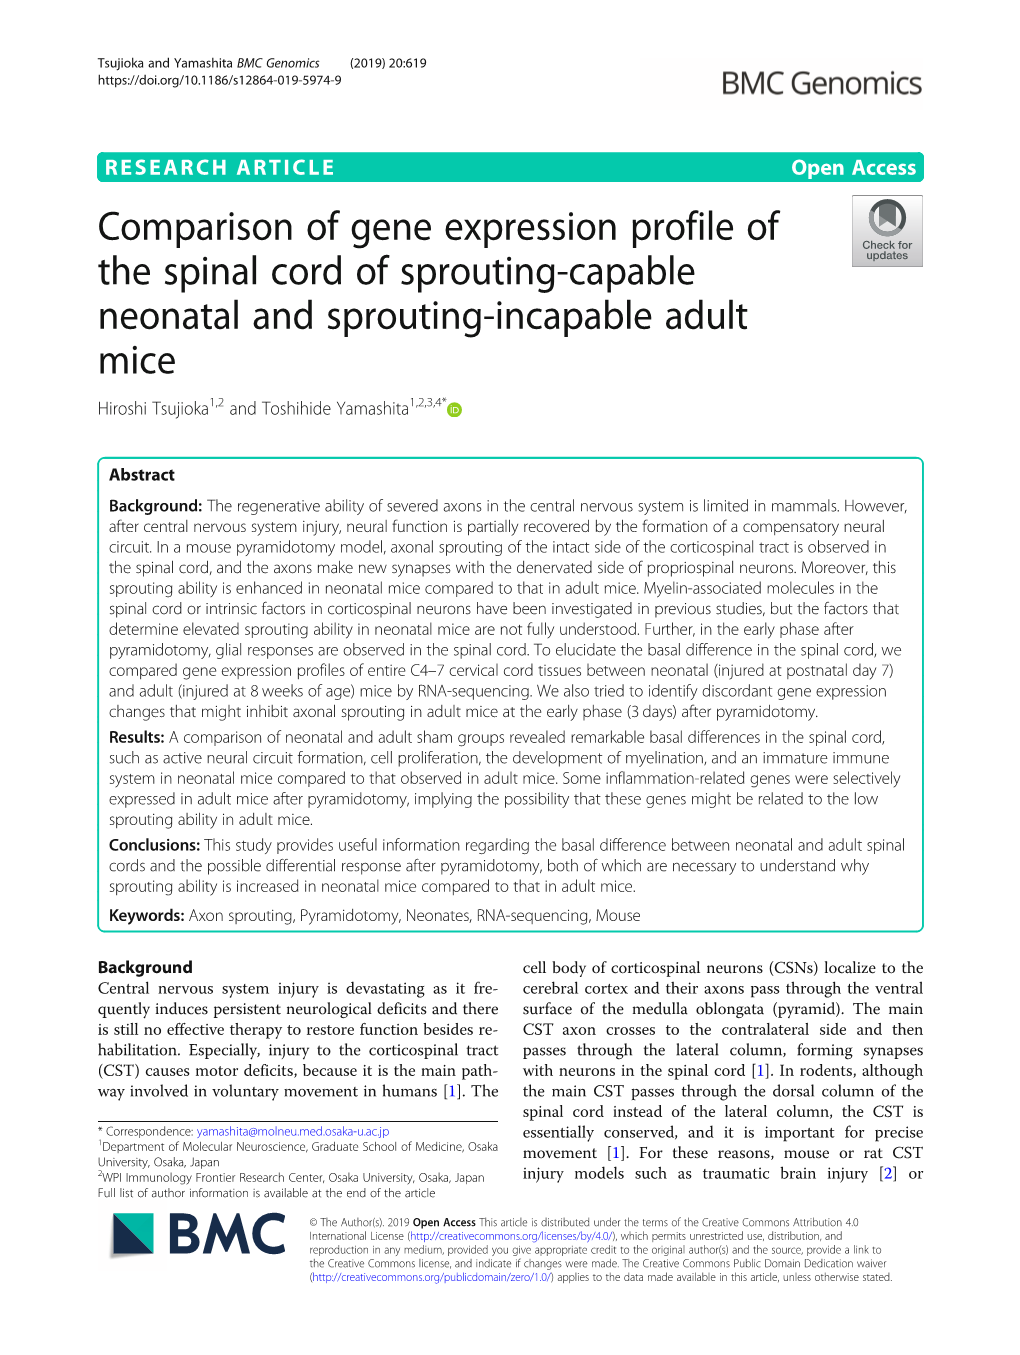 Comparison of Gene Expression Profile of the Spinal Cord Of